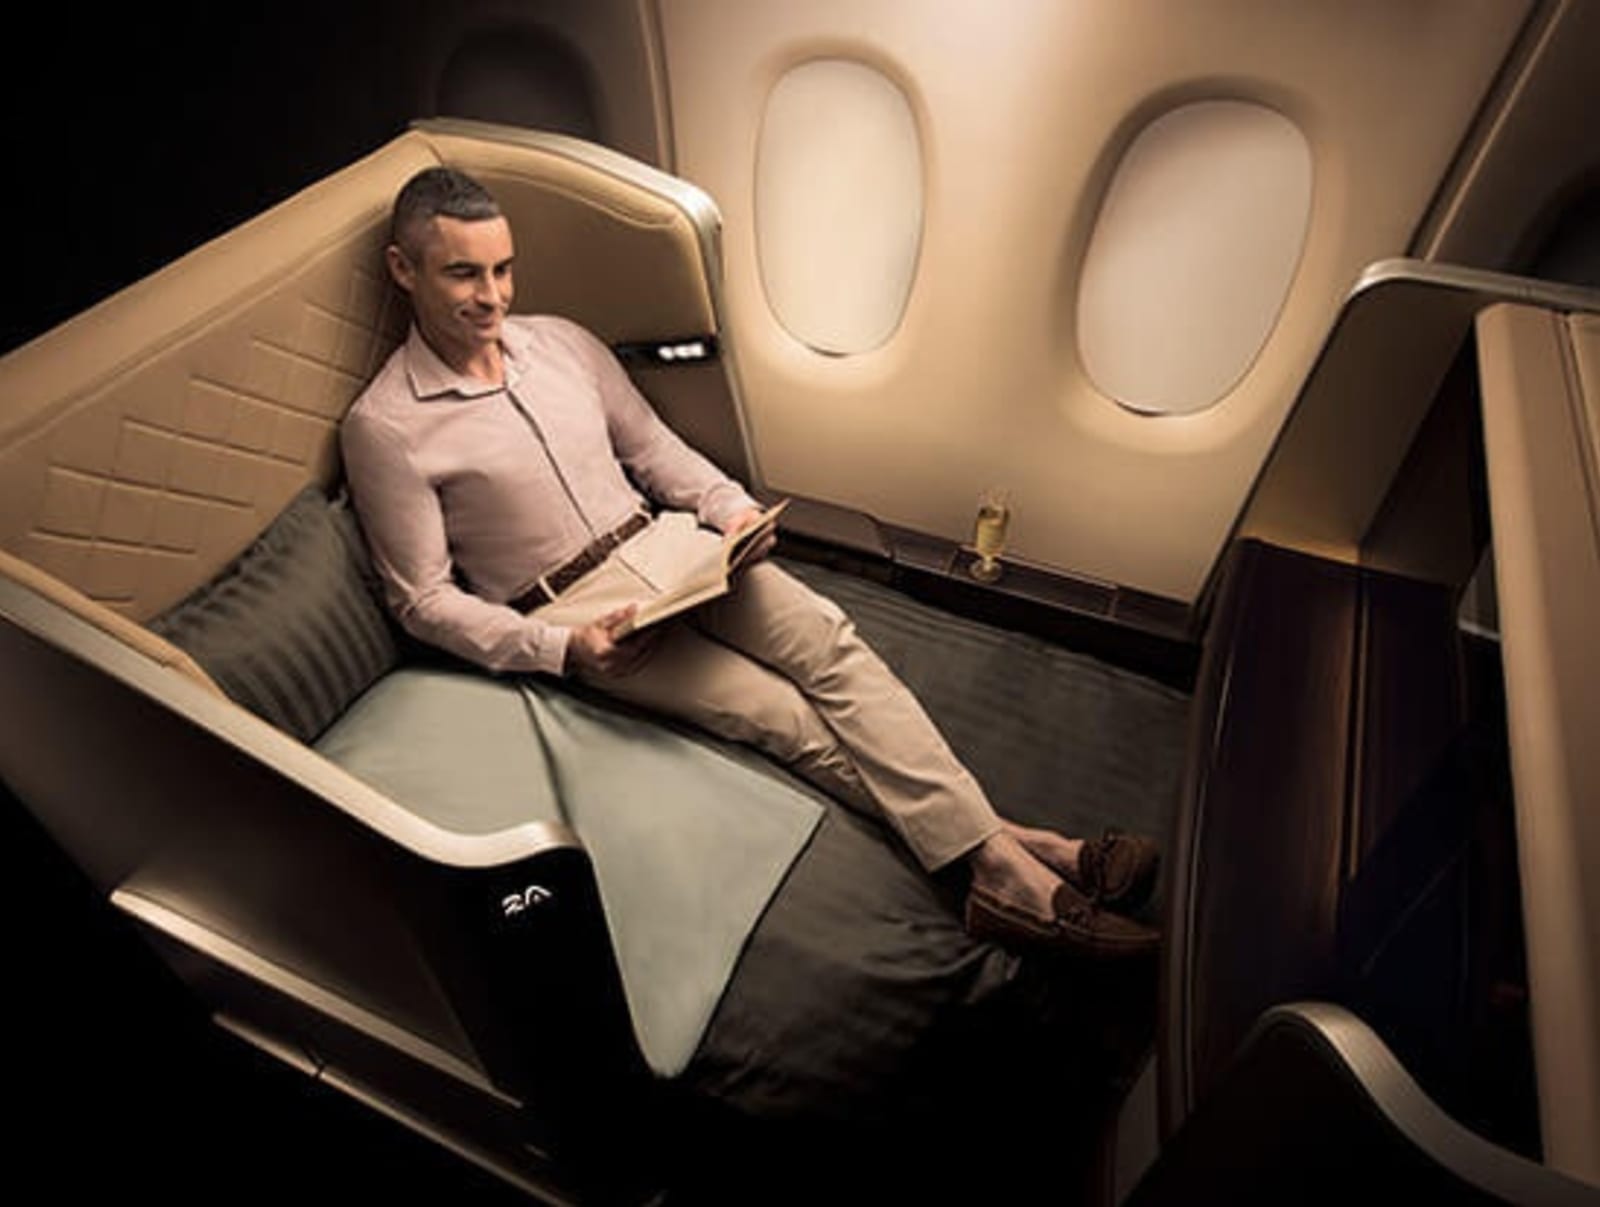 RS-New-First-class-man-reading-book-in-suite.jpg